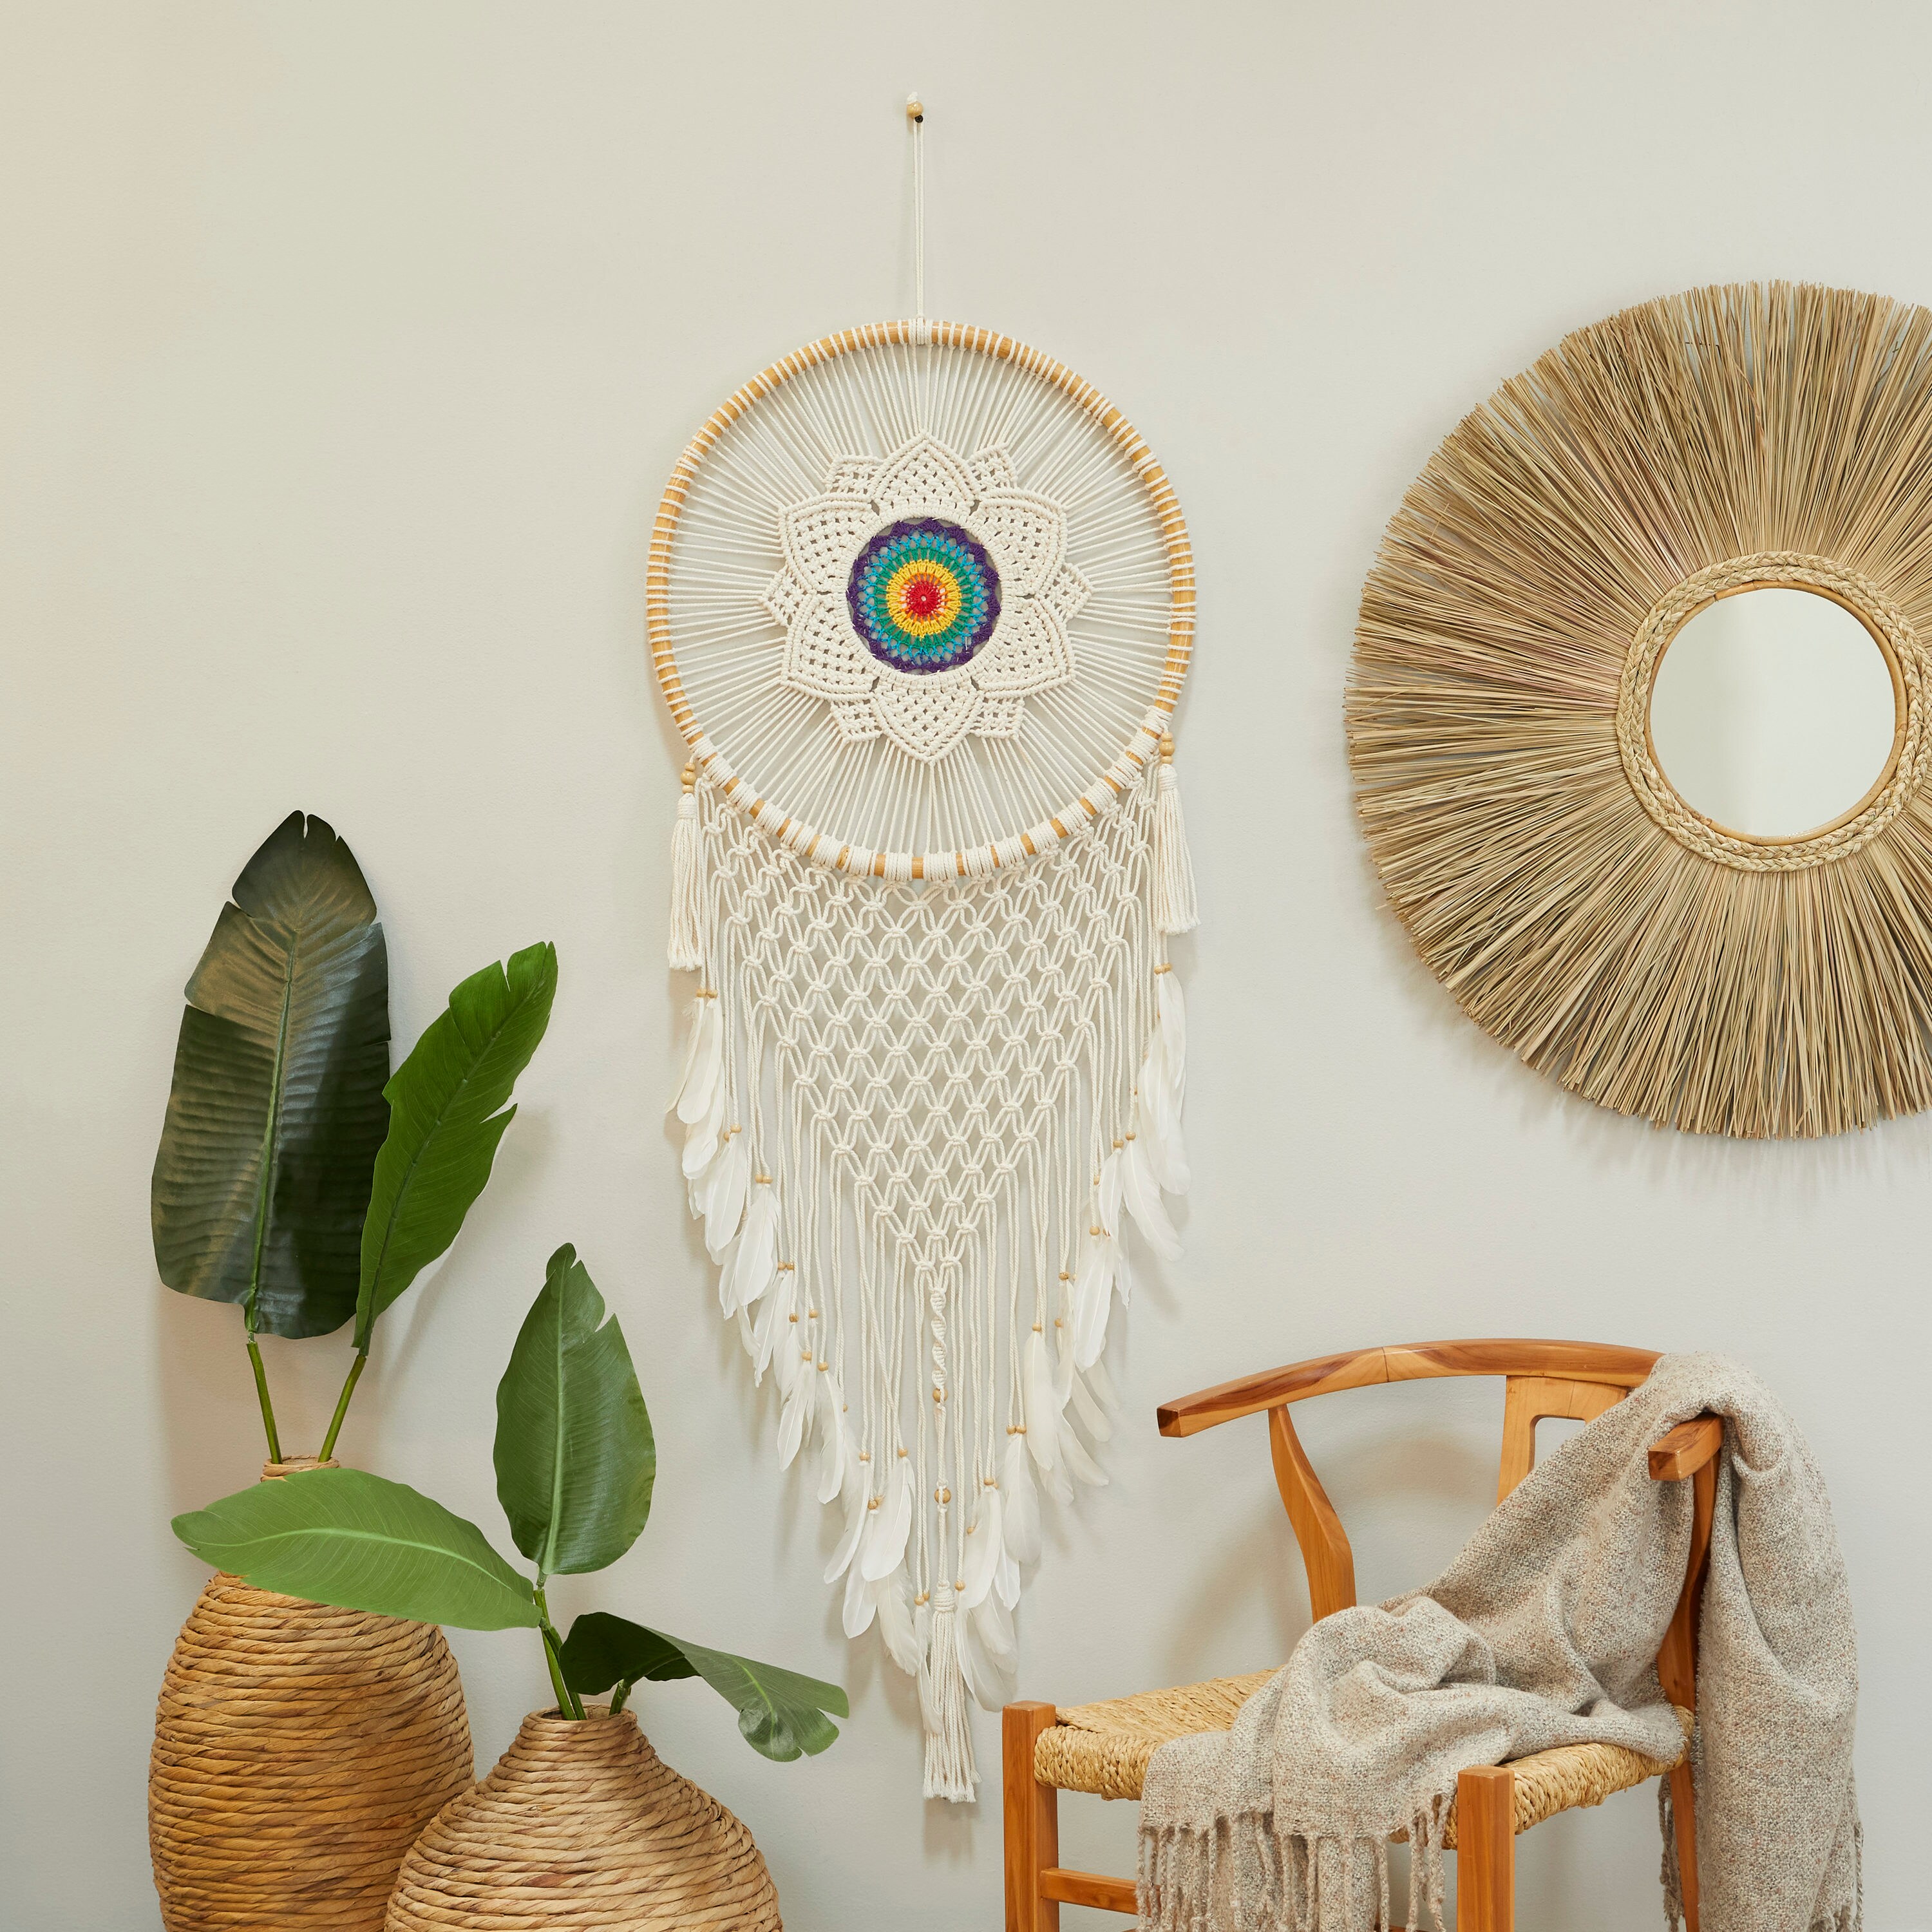 Boho Fabric By The Yard, Pattern Design Outline Dreamcatchers And